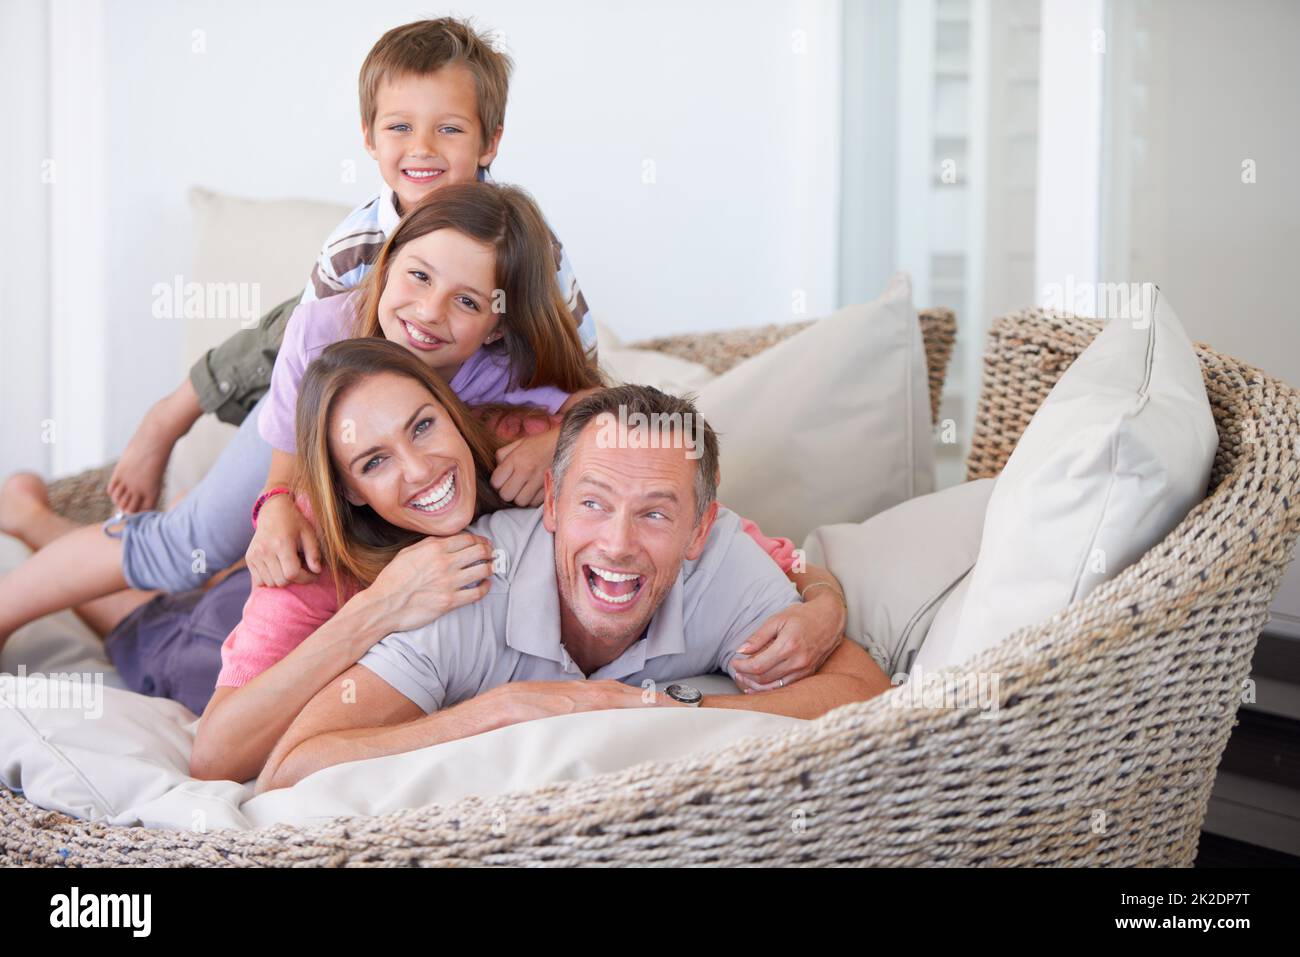 Pile on Dad. Portrait of a happy young family of four piled on top of one another. Stock Photo